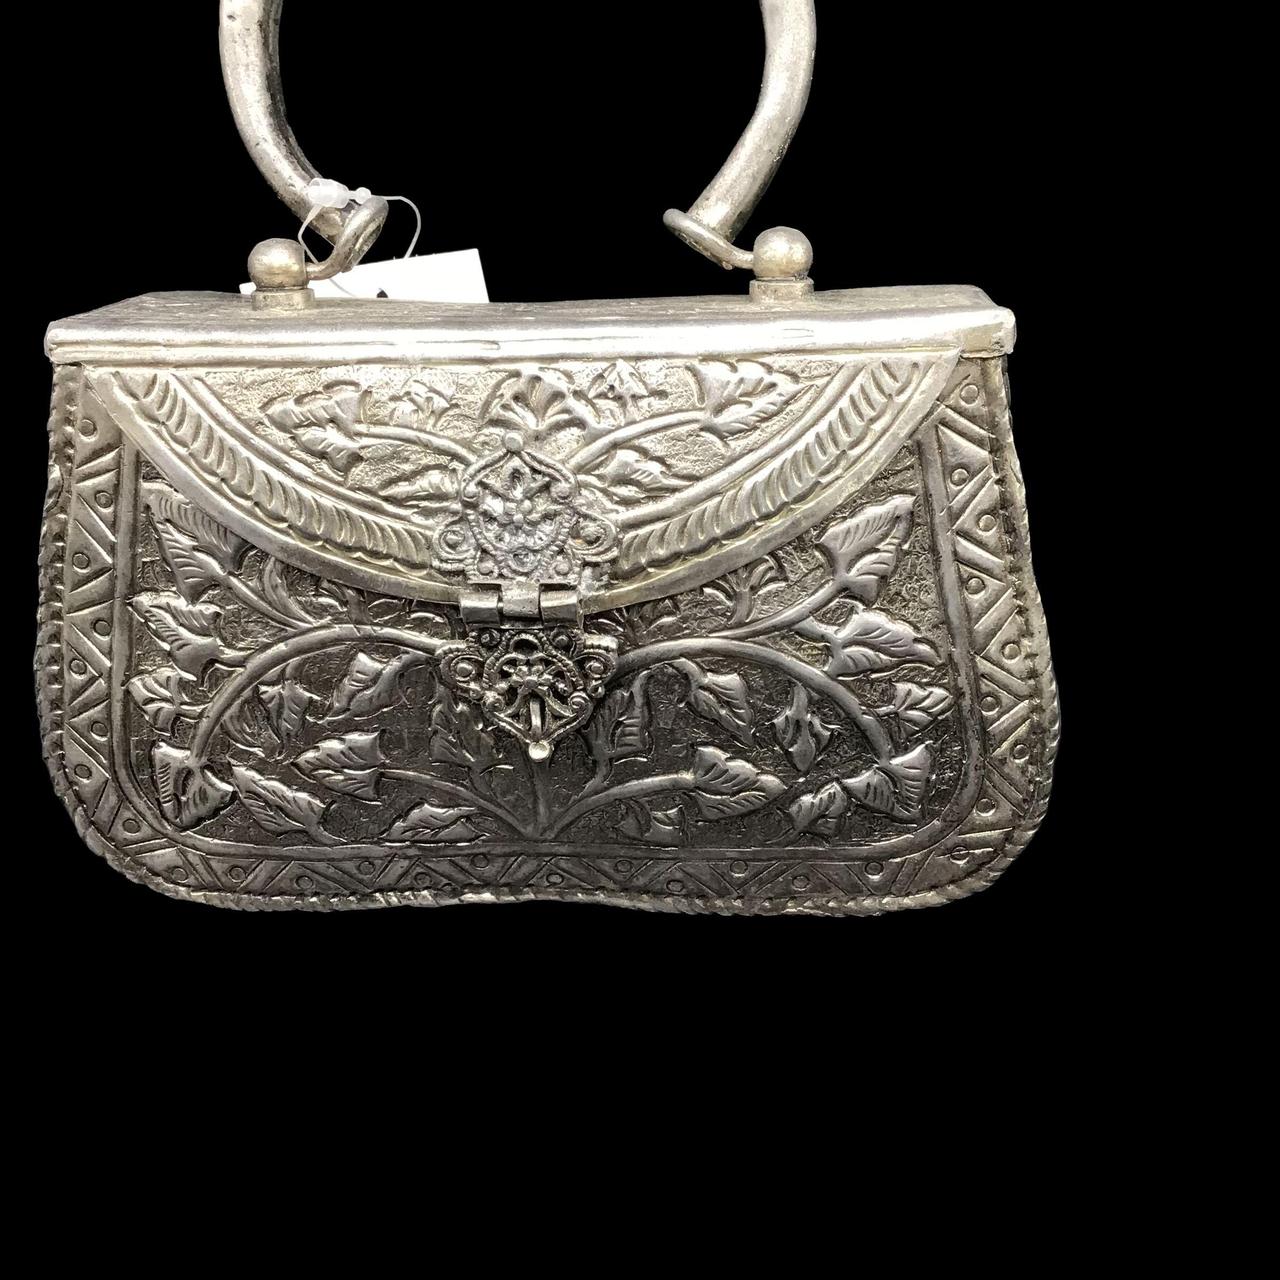 Product Image 1 - Metal Purse Hand Crafted Decorative